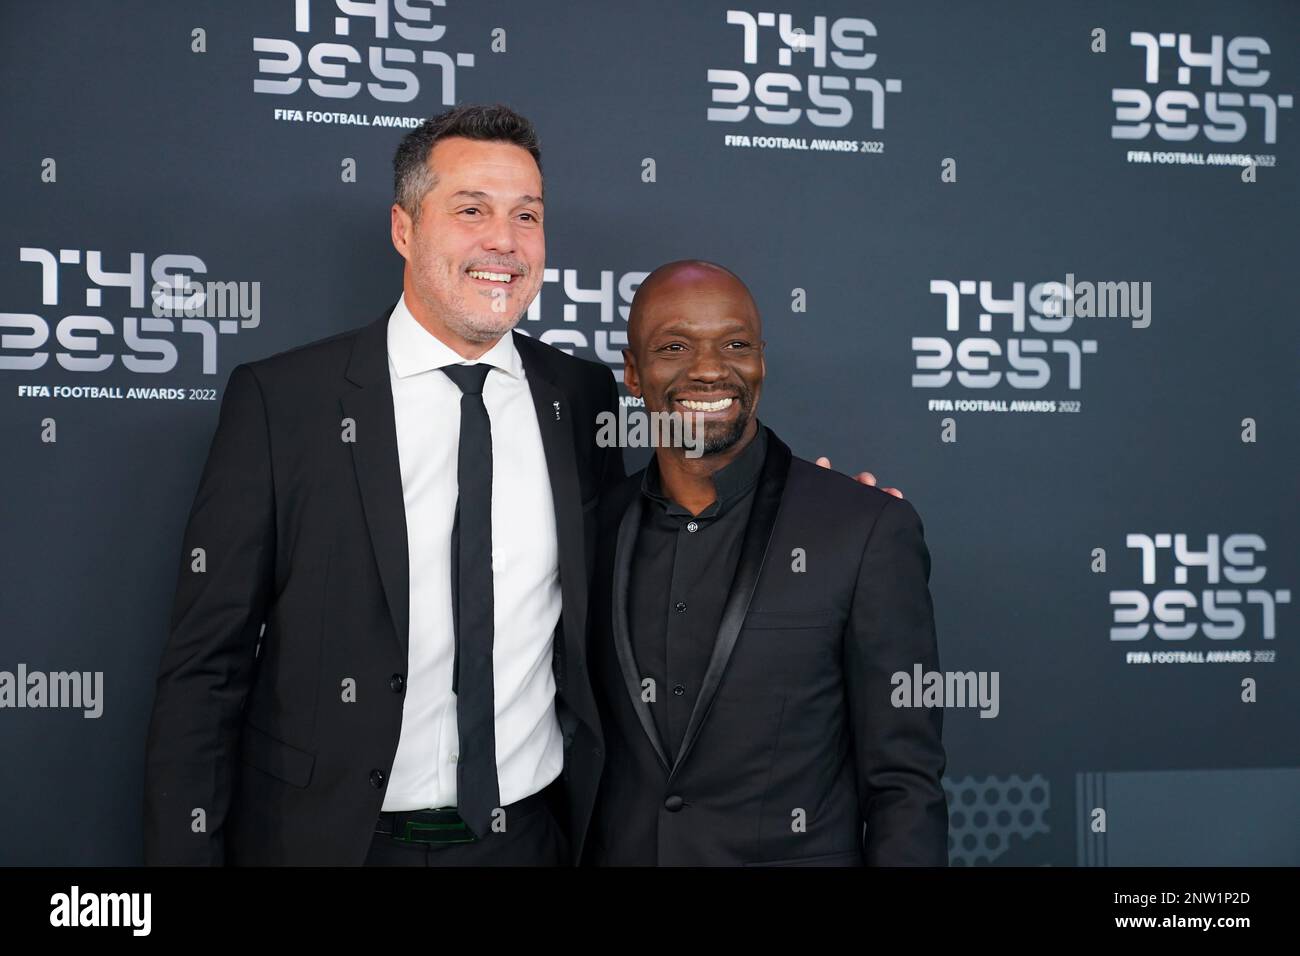 Paris, France. 27th Feb, 2023. Paris, France, February 27th 2023: Julio Cesar (former Brazil football player) and Claude Makelele (former France player) pose for a photo on the Green Carpet during the The Best FIFA Football Awards 2022 at Salle Pleyel in Paris, France. (Daniela Porcelli/SPP) Credit: SPP Sport Press Photo. /Alamy Live News Stock Photo